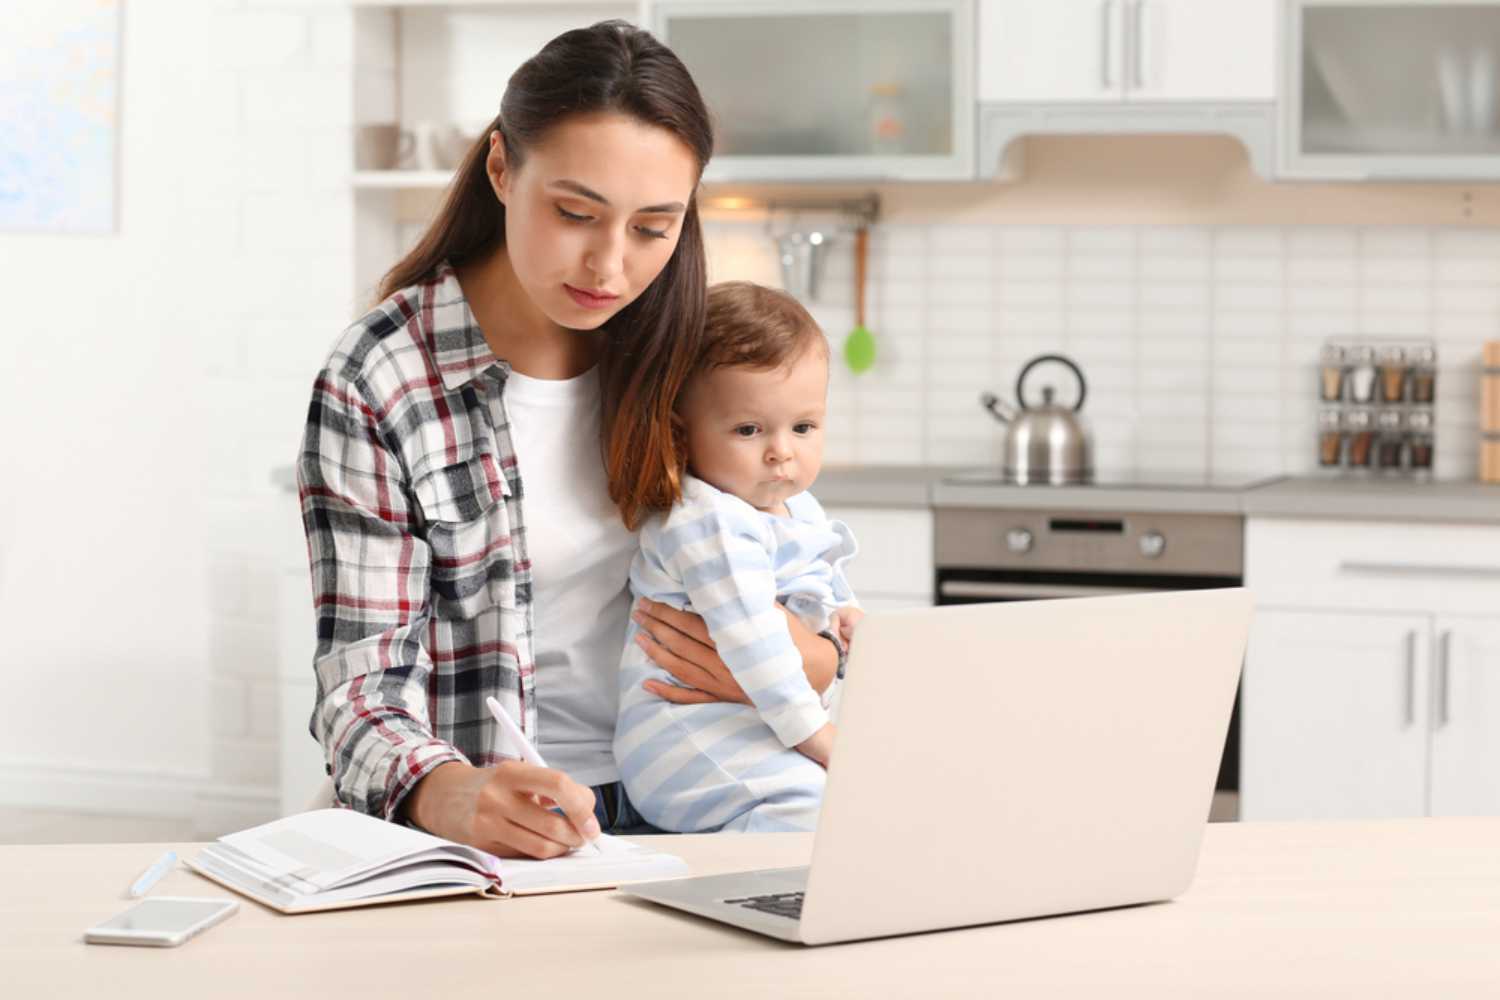 7 Tactics Every Working Mom Should Employ To Balance Work and Family